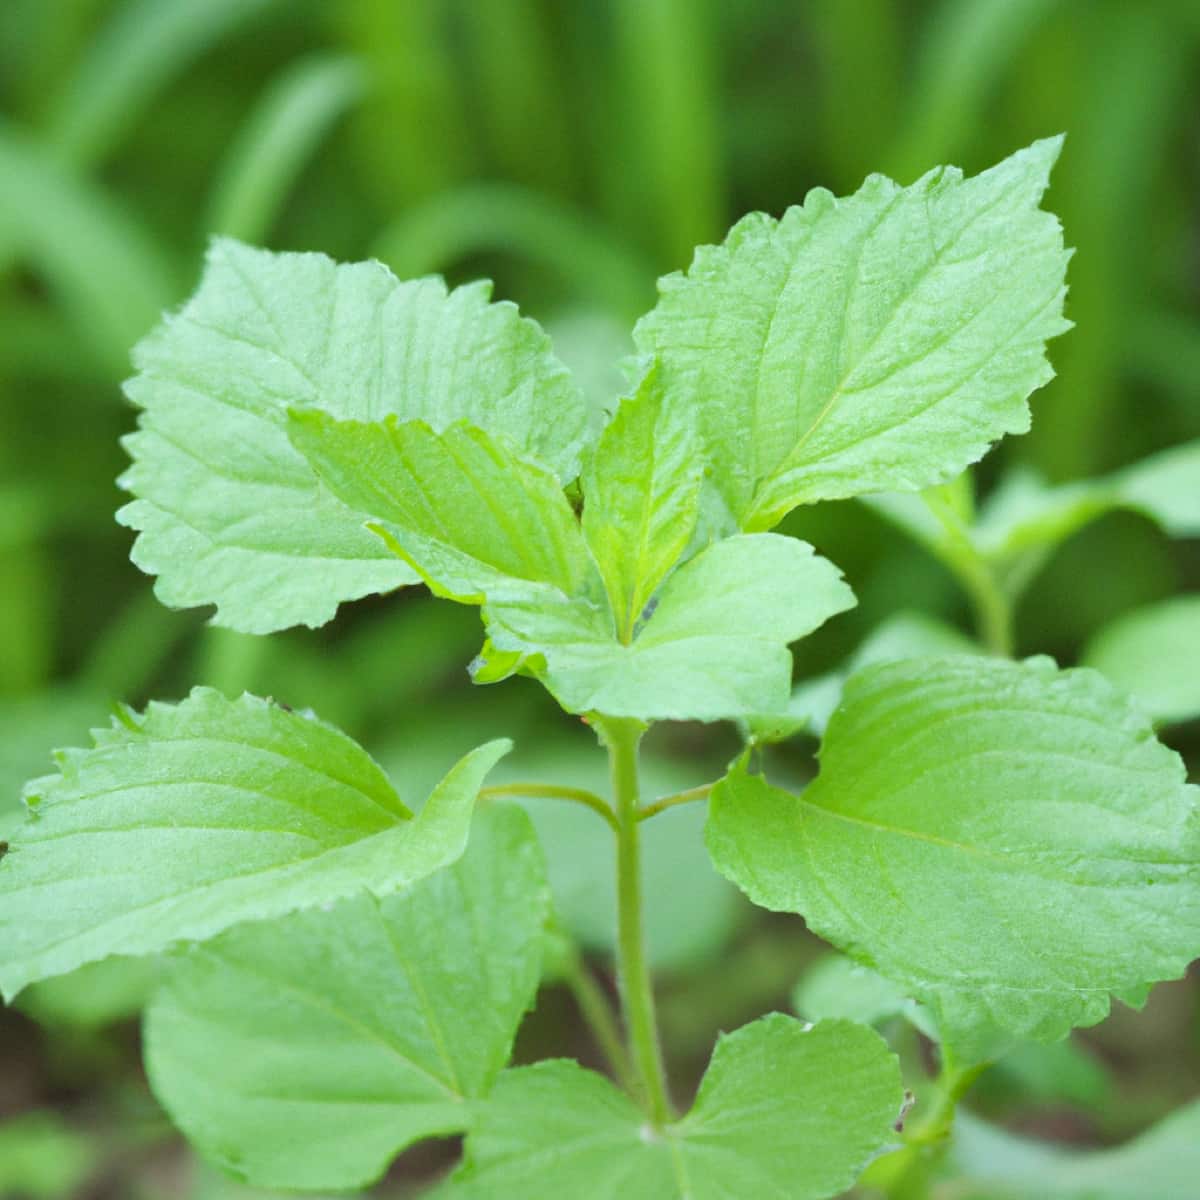 Key Rules to Grow and Care for Patchouli